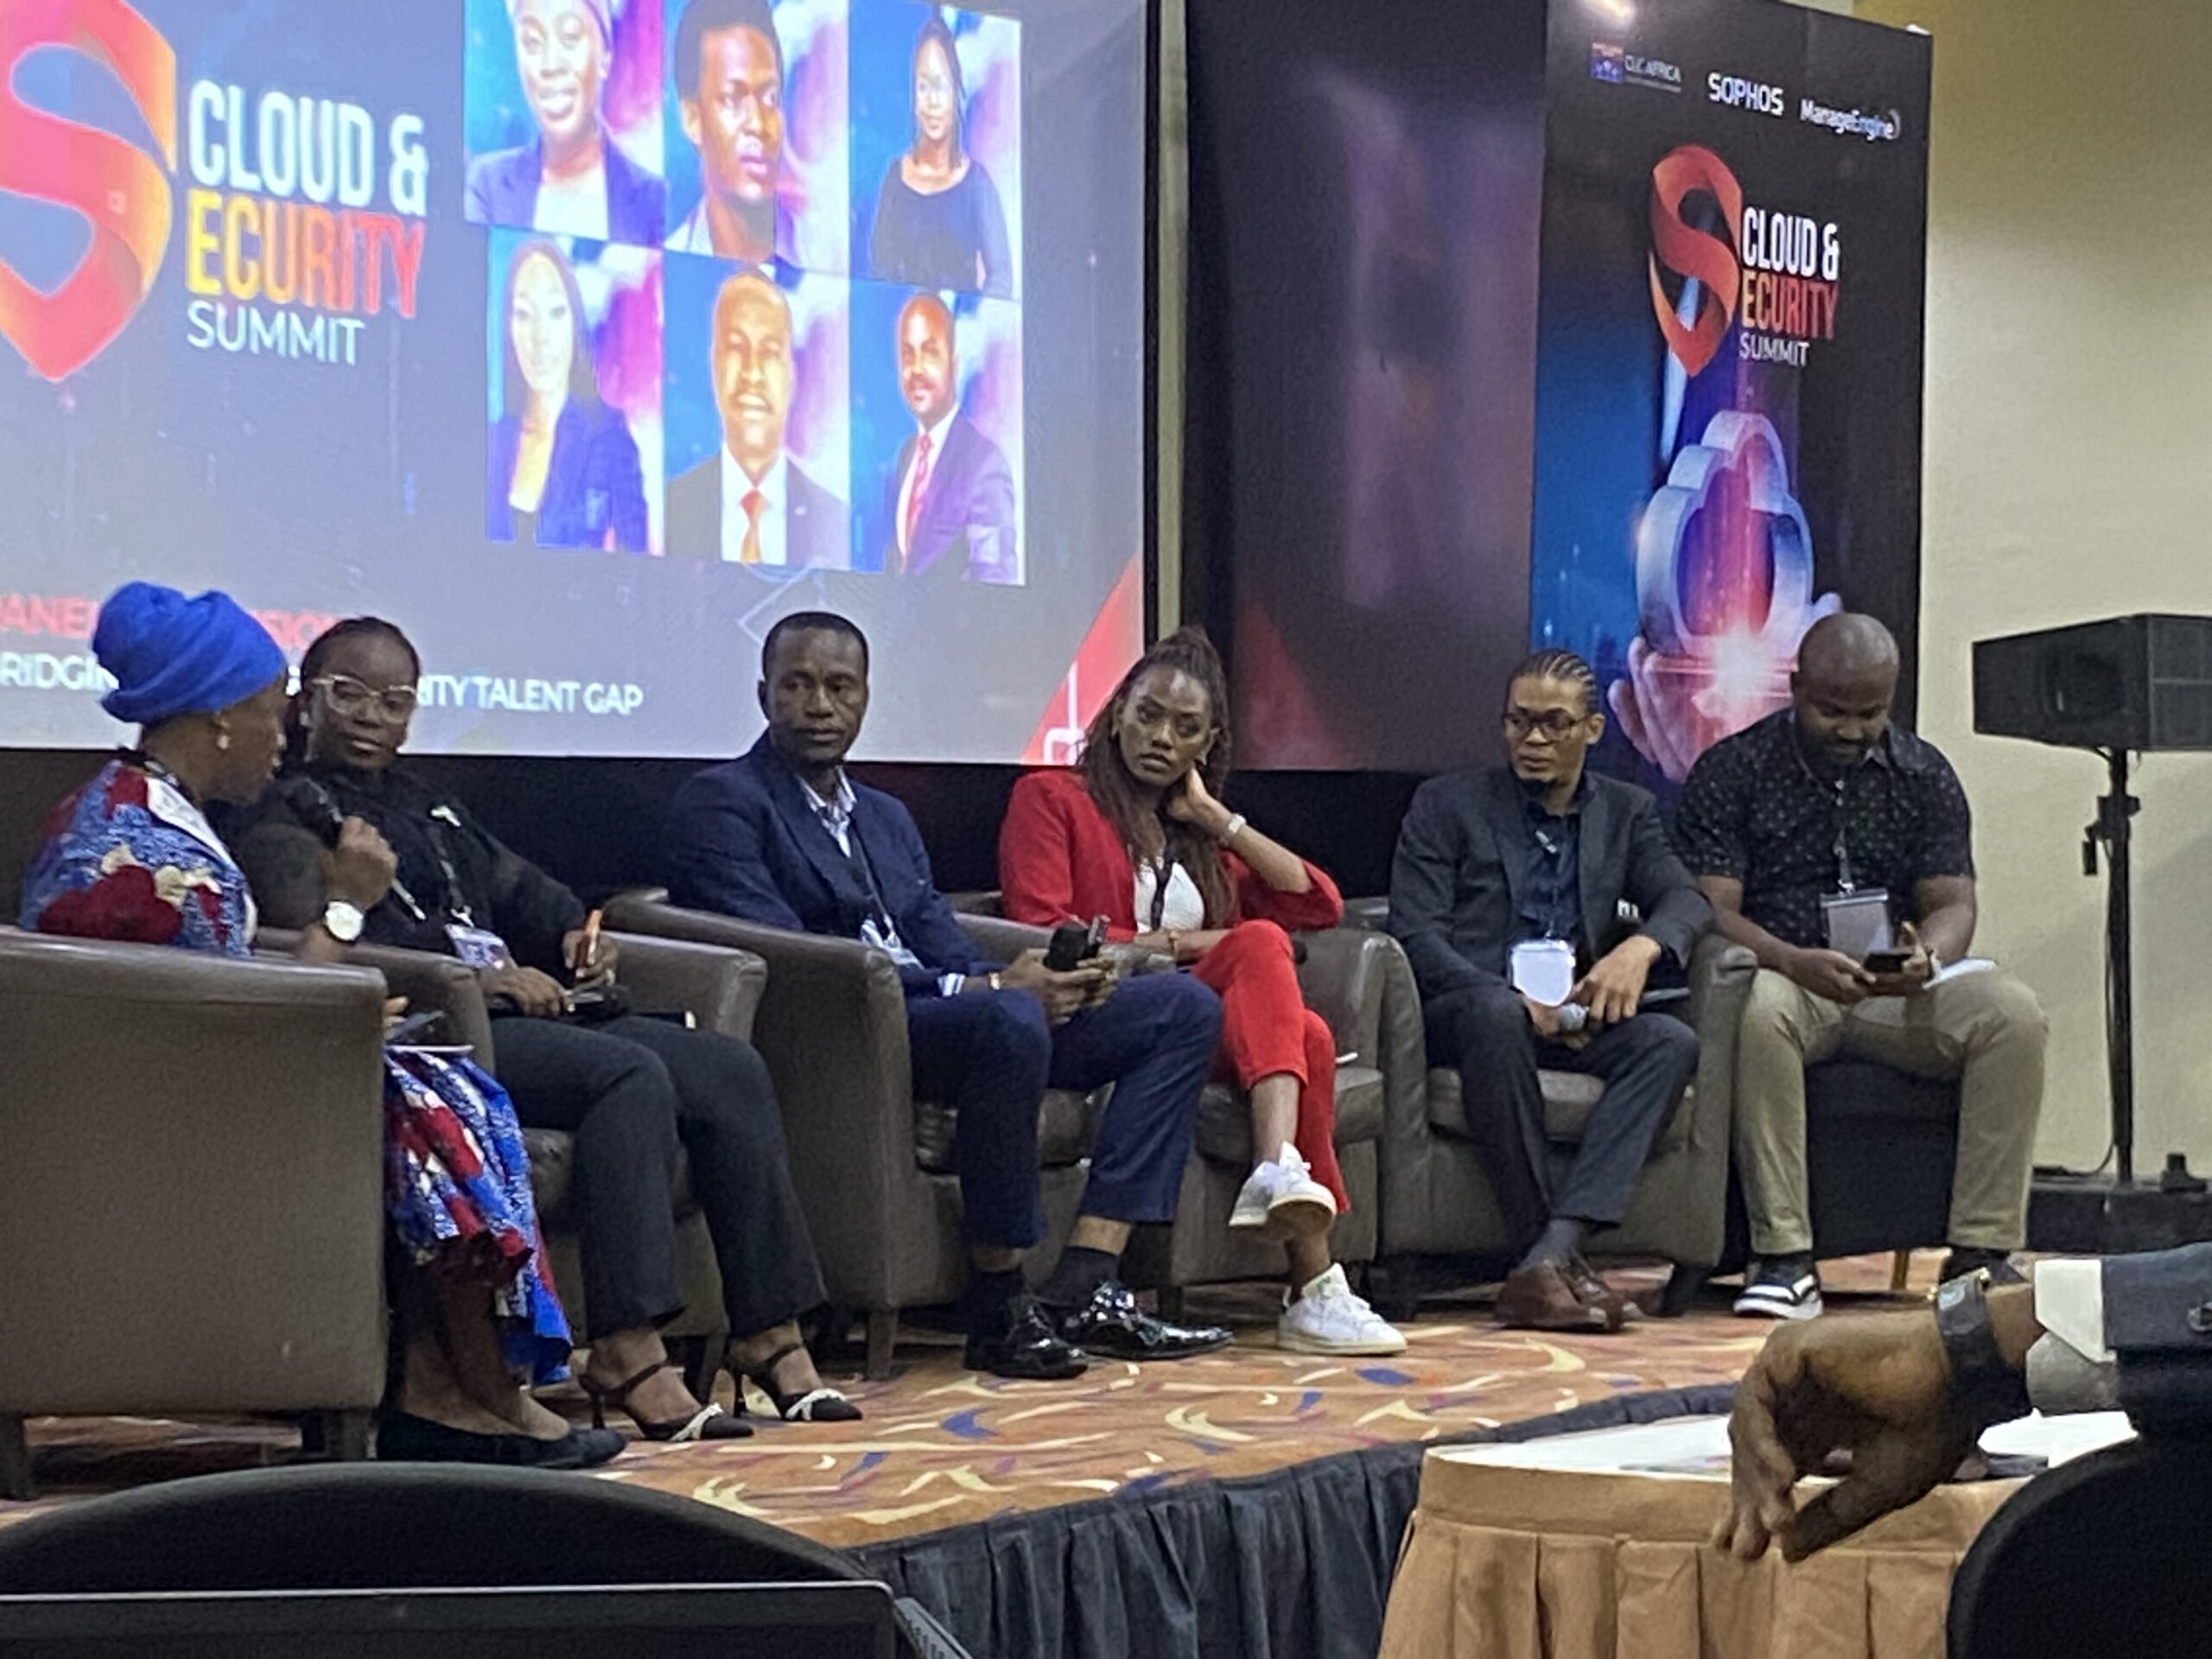 Experts discuss cloud computing, Cybersecurity at Africa Cloud and Security Summit